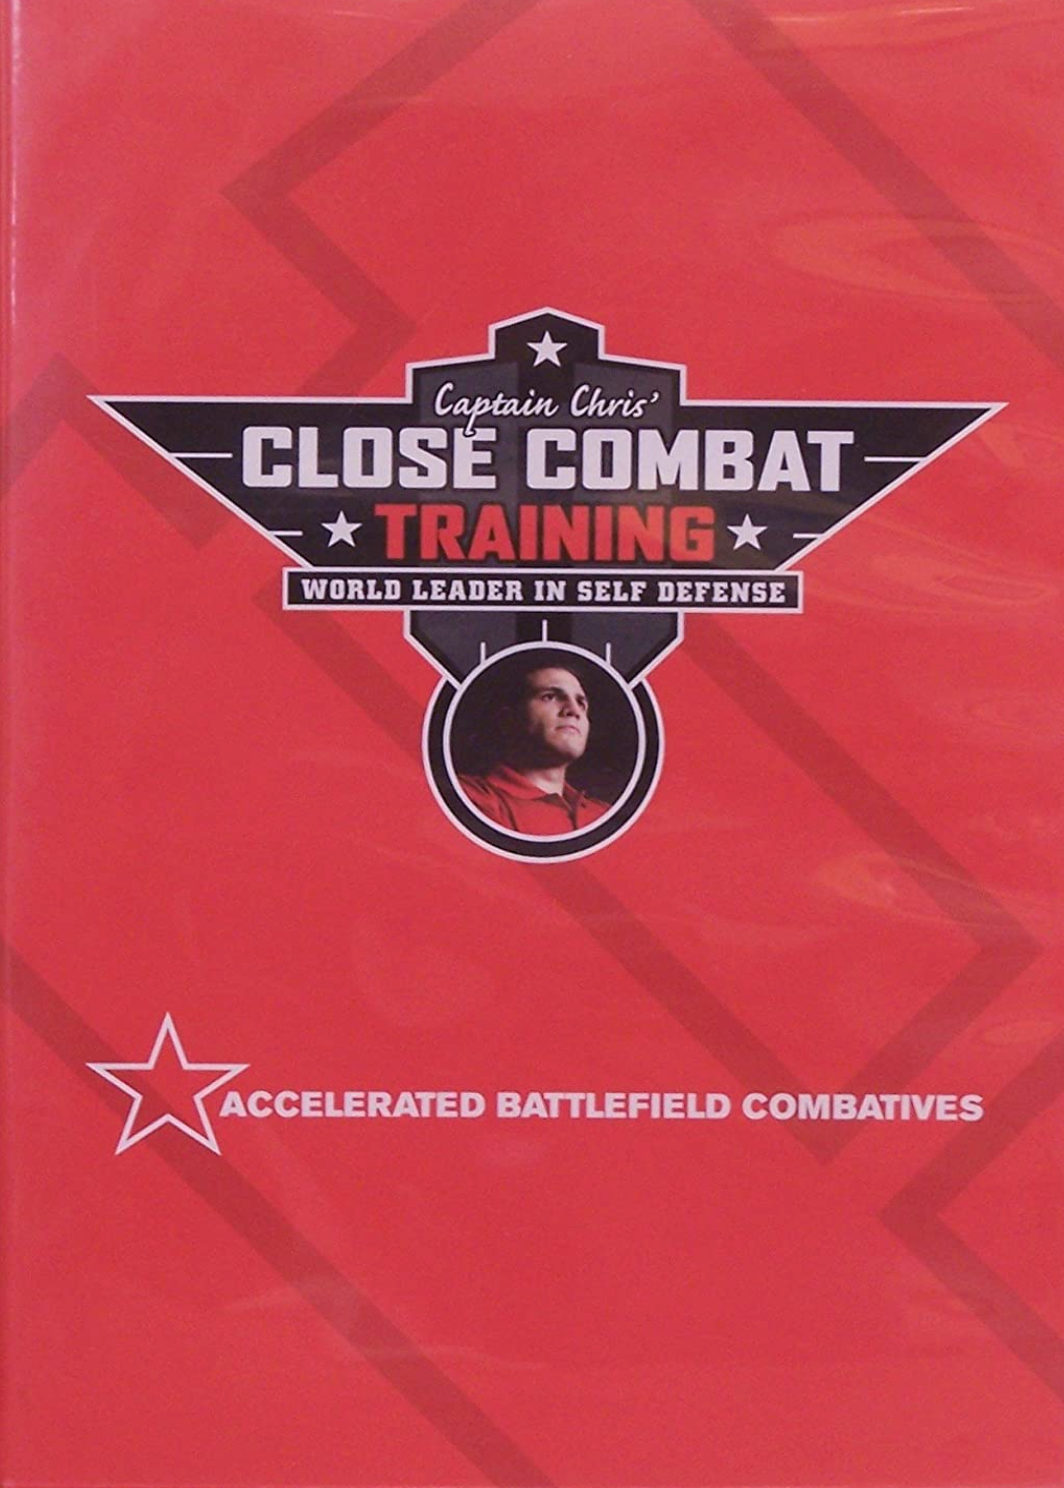 Close Combat Training Accelerated Battlefield Combatives 4 DVD Set with Captain Chris (Preowned) - Budovideos